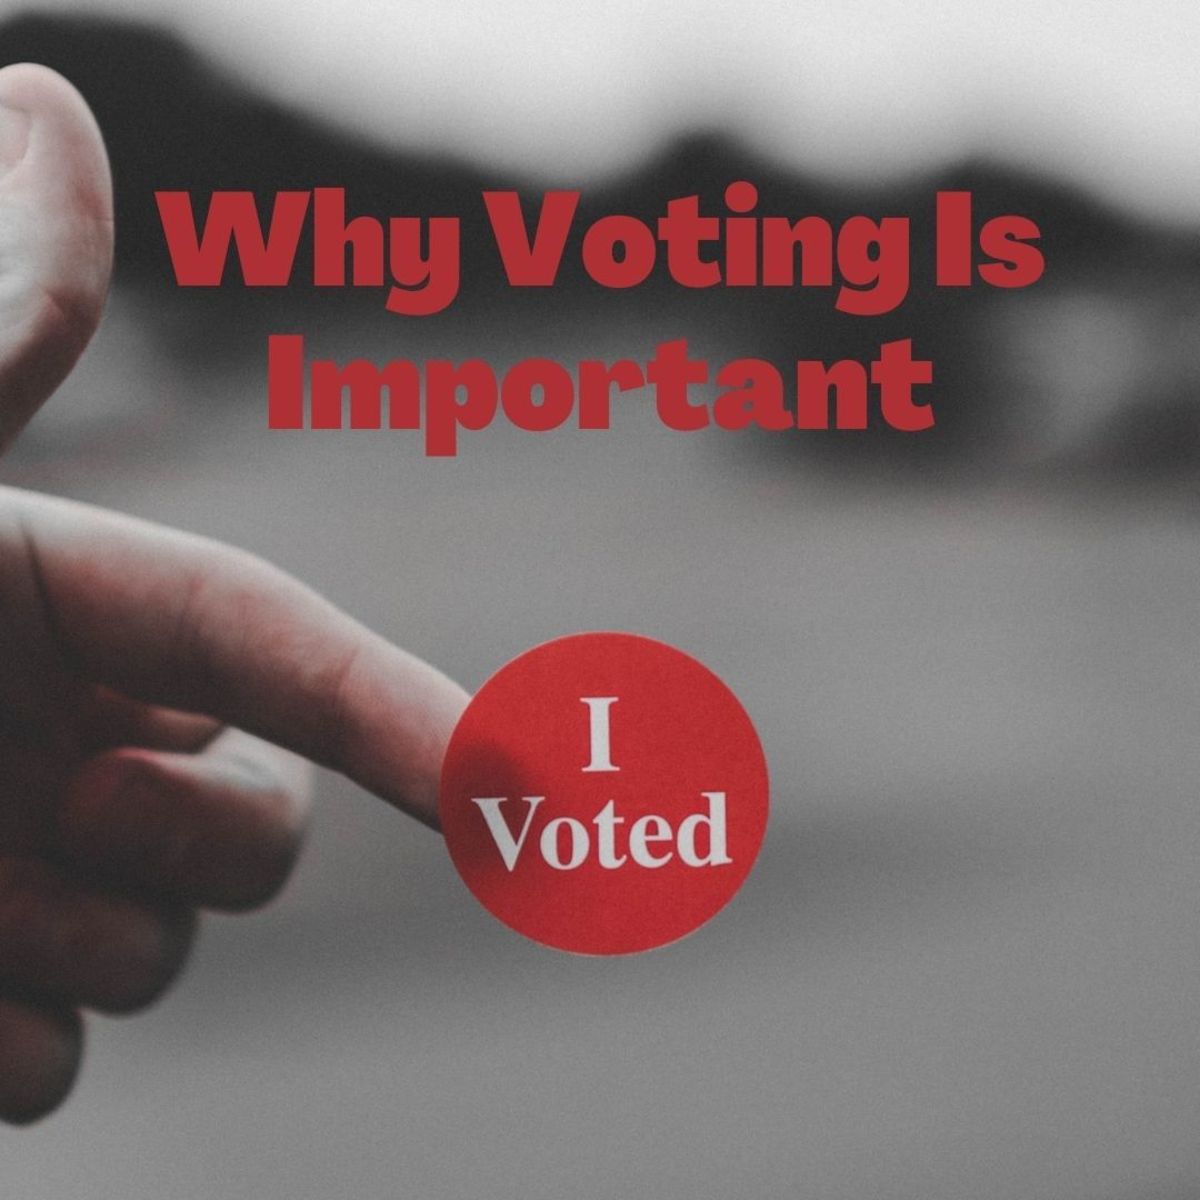 Many believe their vote doesn't matter—so why should you decide to vote?